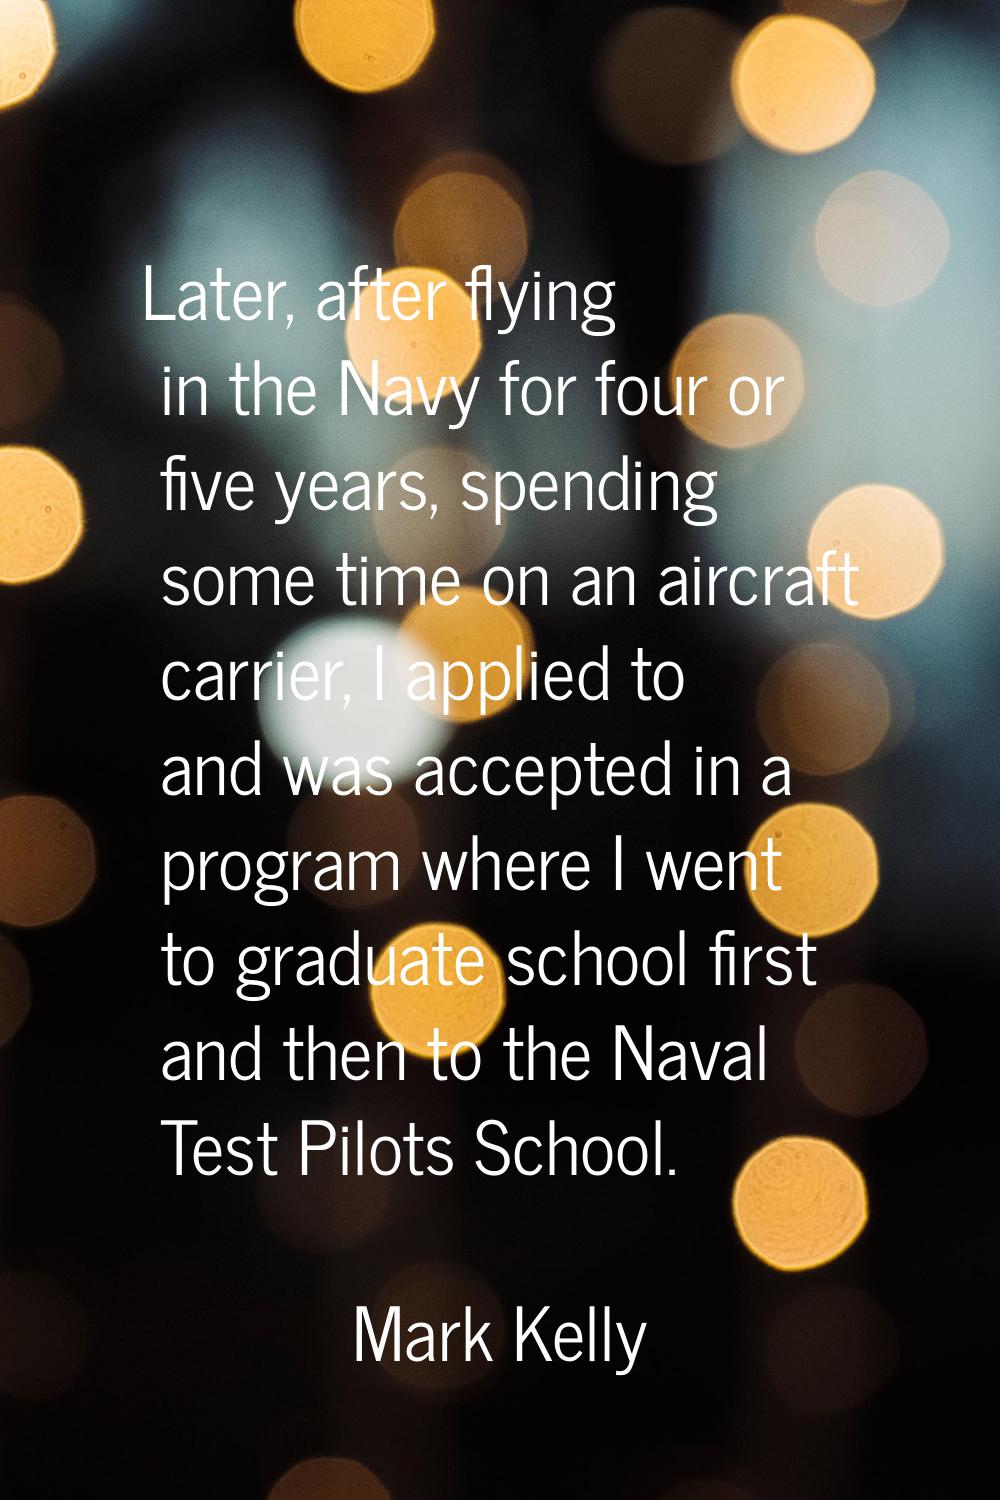 Later, after flying in the Navy for four or five years, spending some time on an aircraft carrier, 